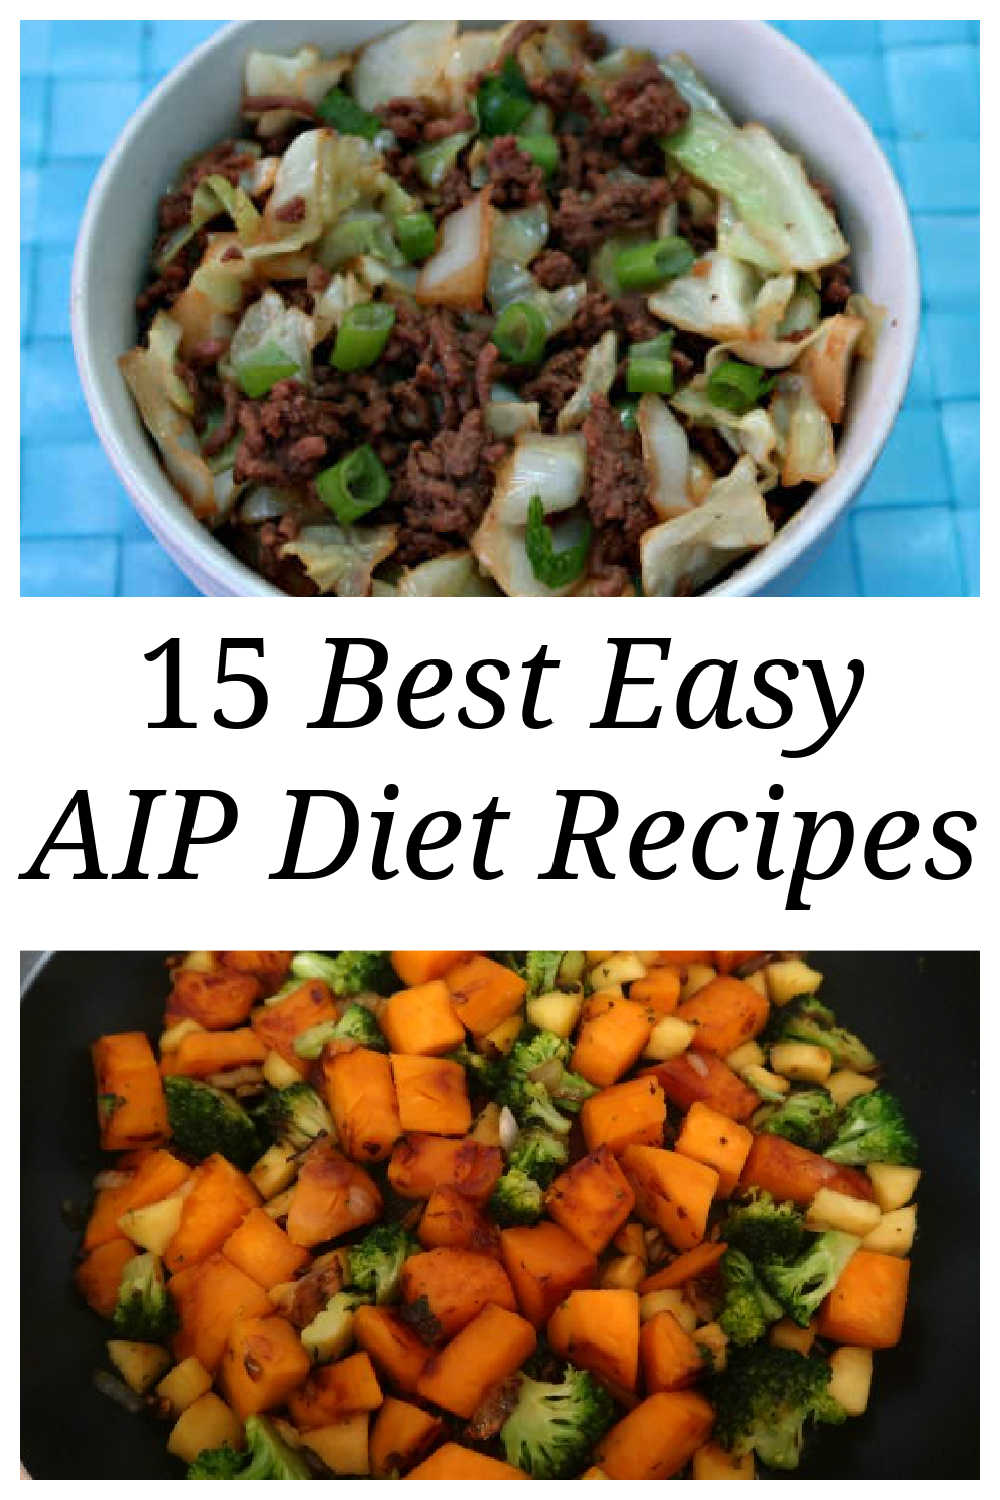 15 AIP Diet Recipes - The best easy autoimmune protocol diet and paleo friendly healing meals for breakfast, lunch and dinner.